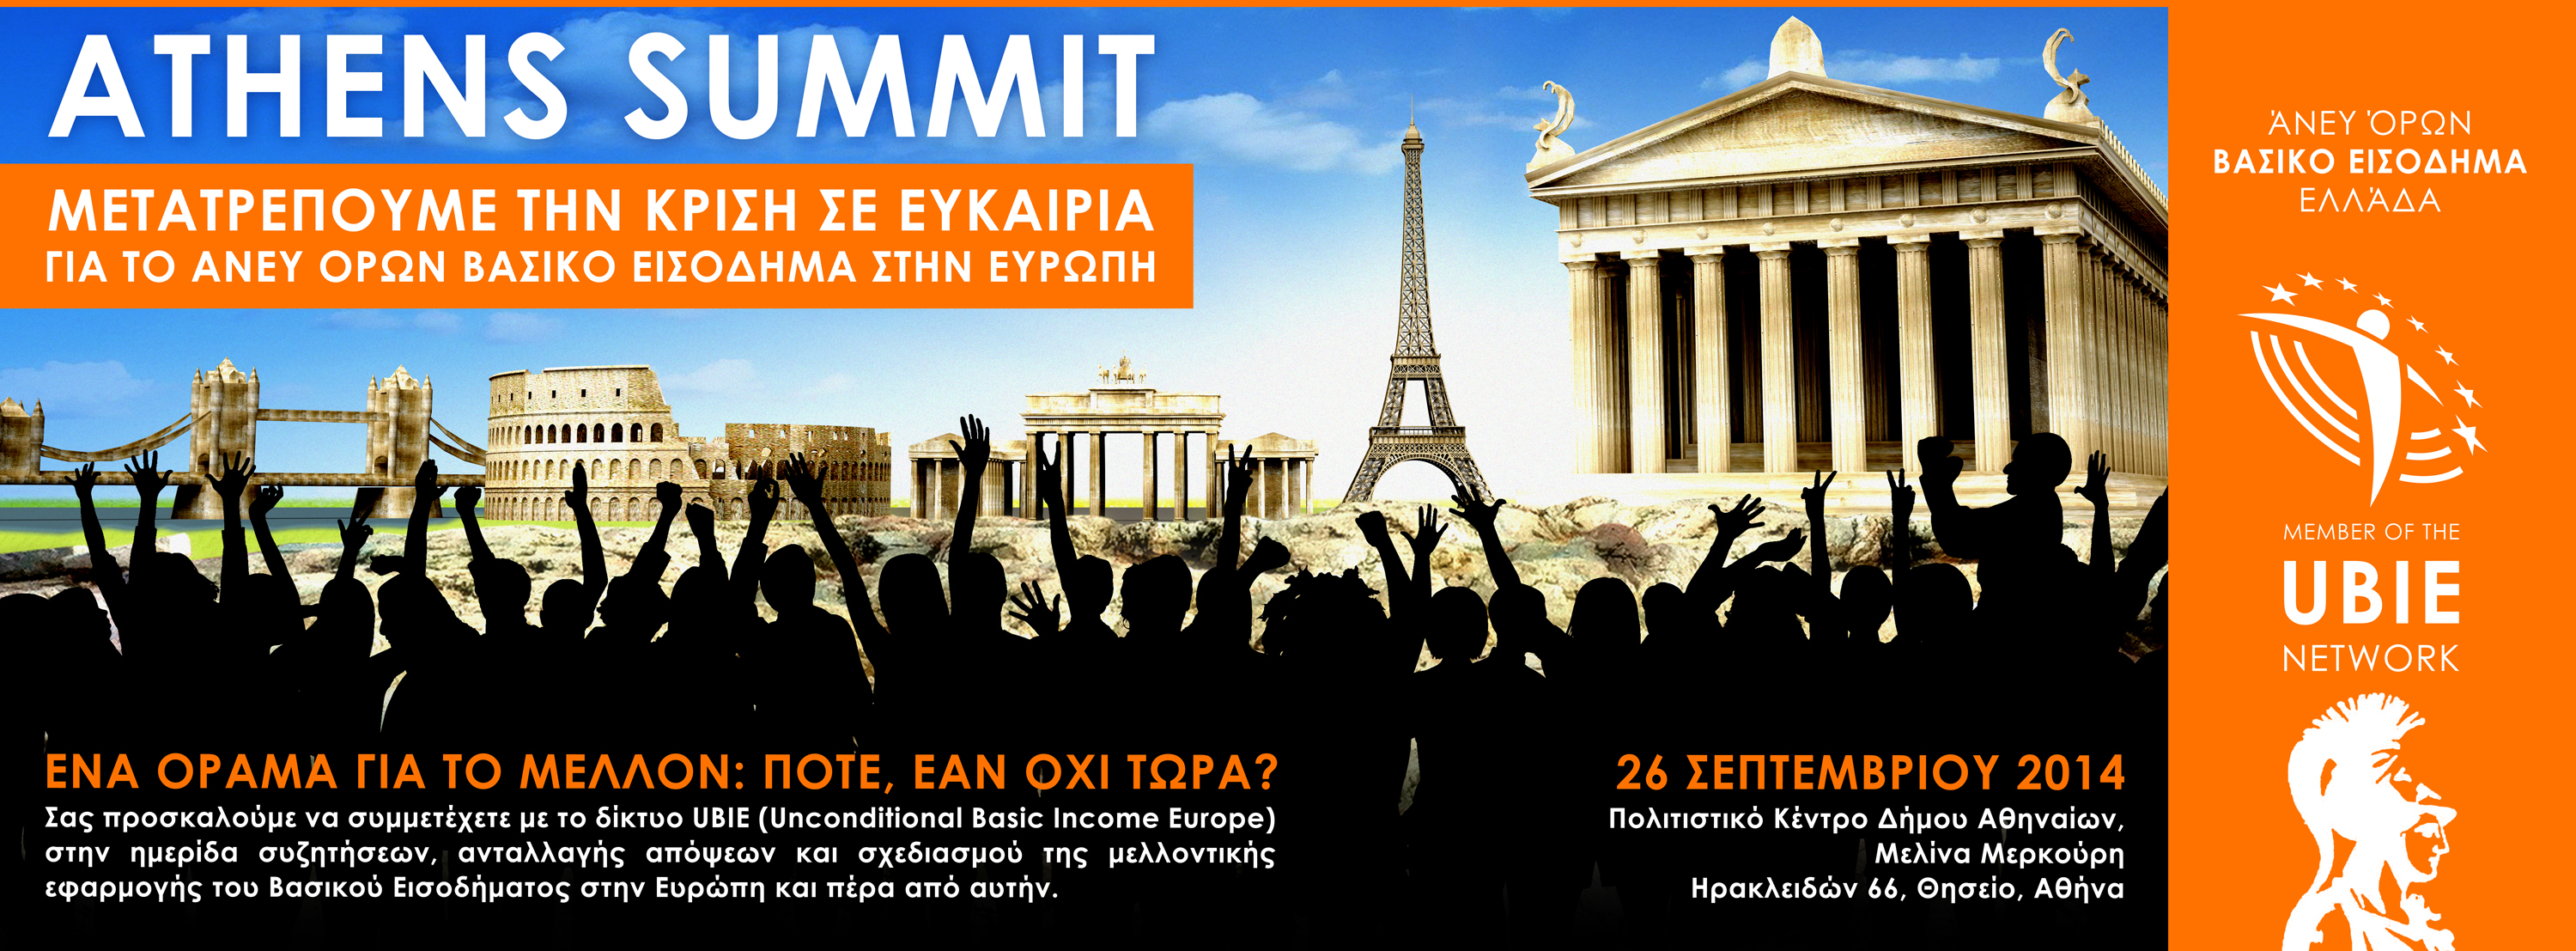 02_Athens_Summit_2014_Poster_Final_Facebook_Campaign_greek